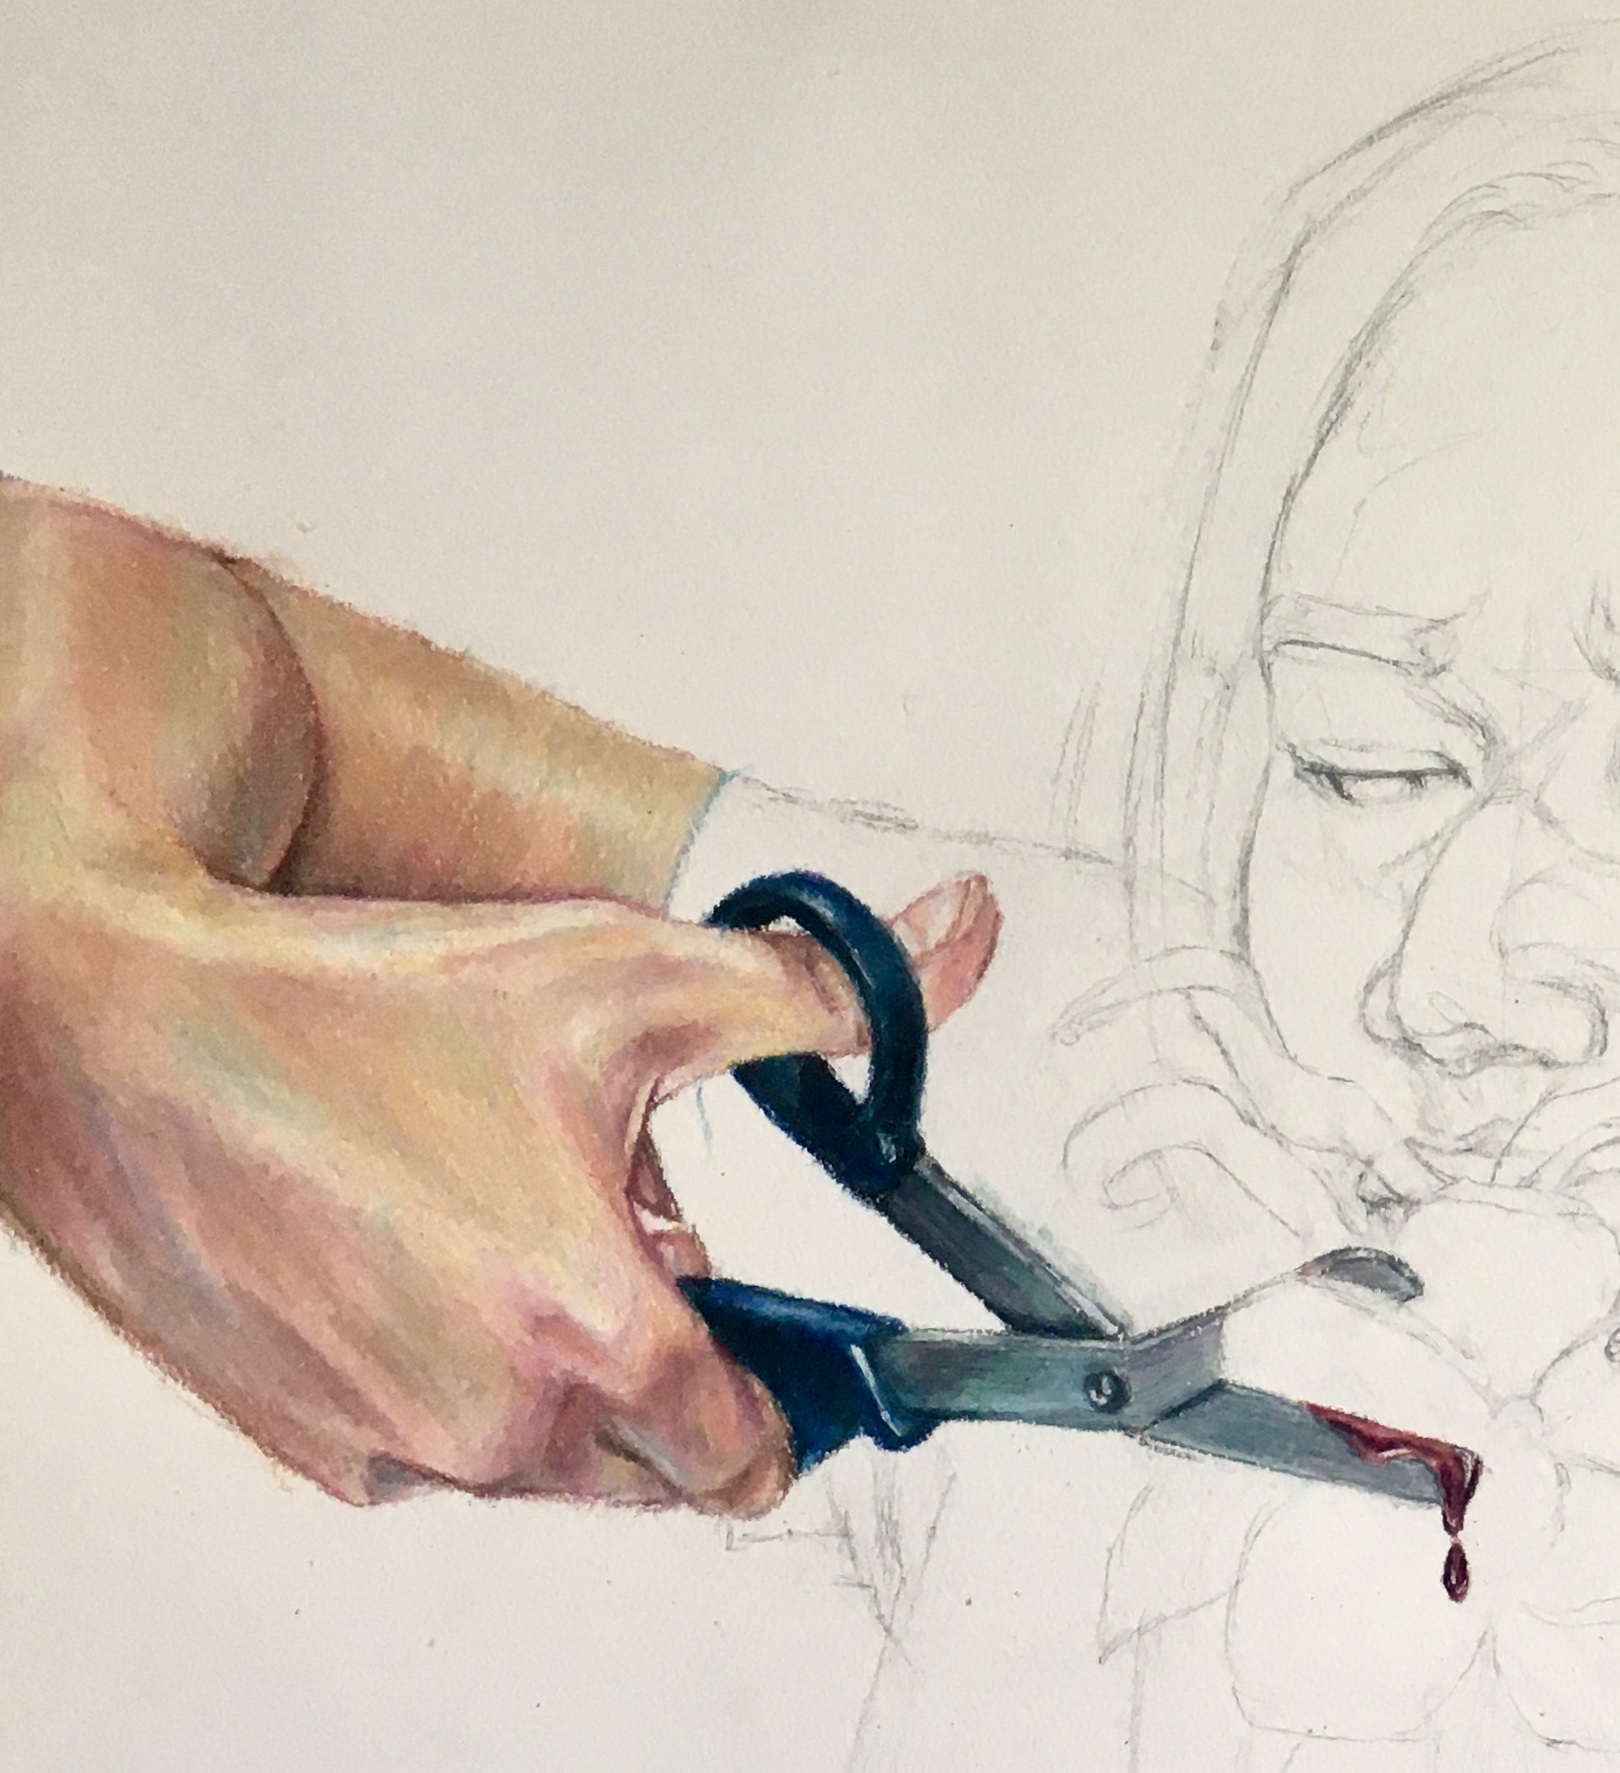 Colored pencil illustration of a hand and scissors